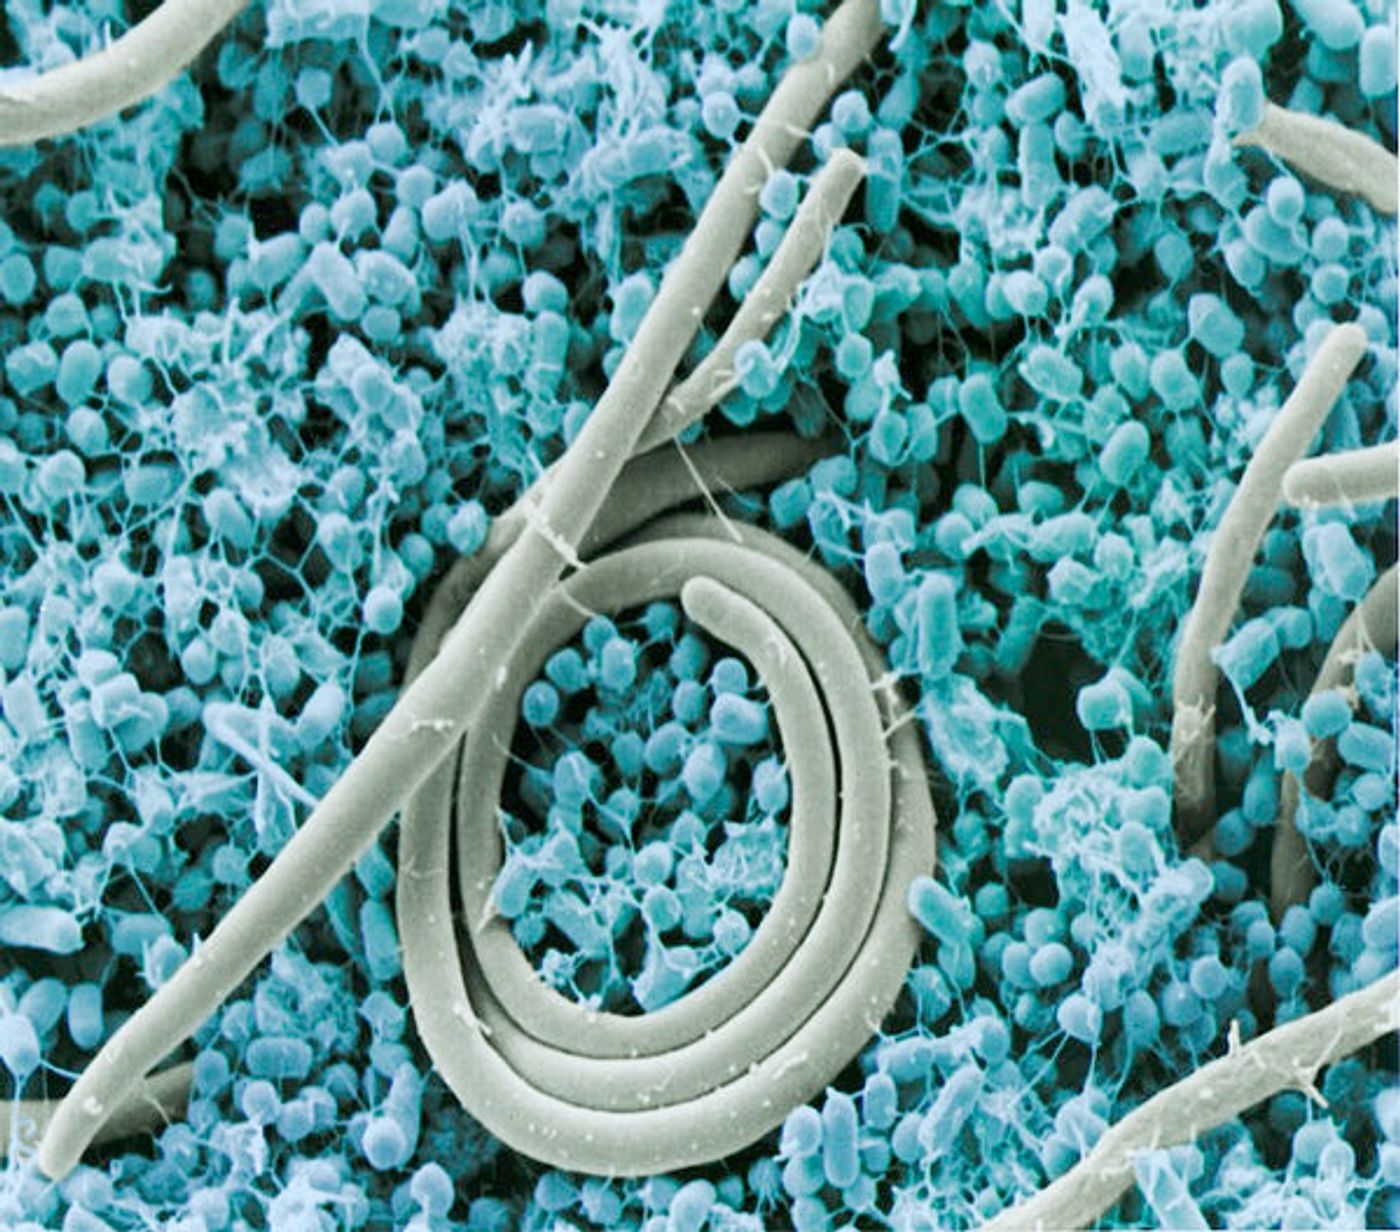 Colorized scanning electron micrograph of the foodborne pathogen Salmonella enteritidis, the most common in the United States alongside Salmonella typhimurium.